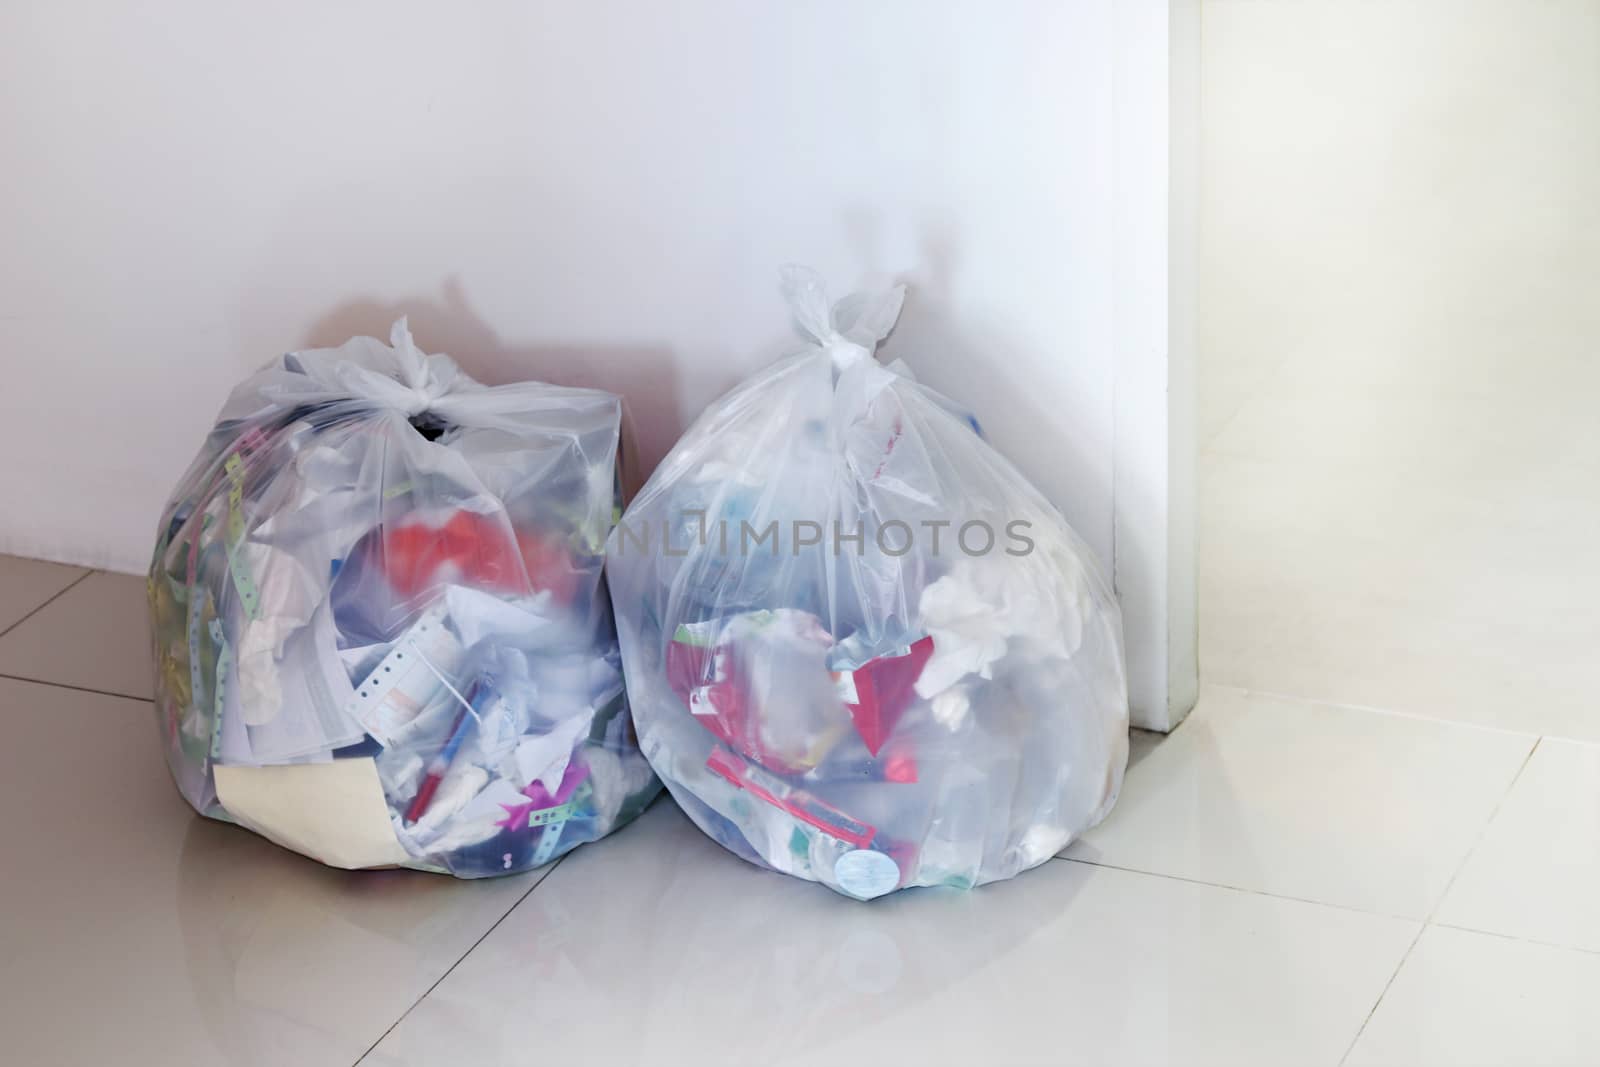 Garbage bag in the office, White garbage bag trash, Dry waste, Recyclable waste paper scrap, 3R